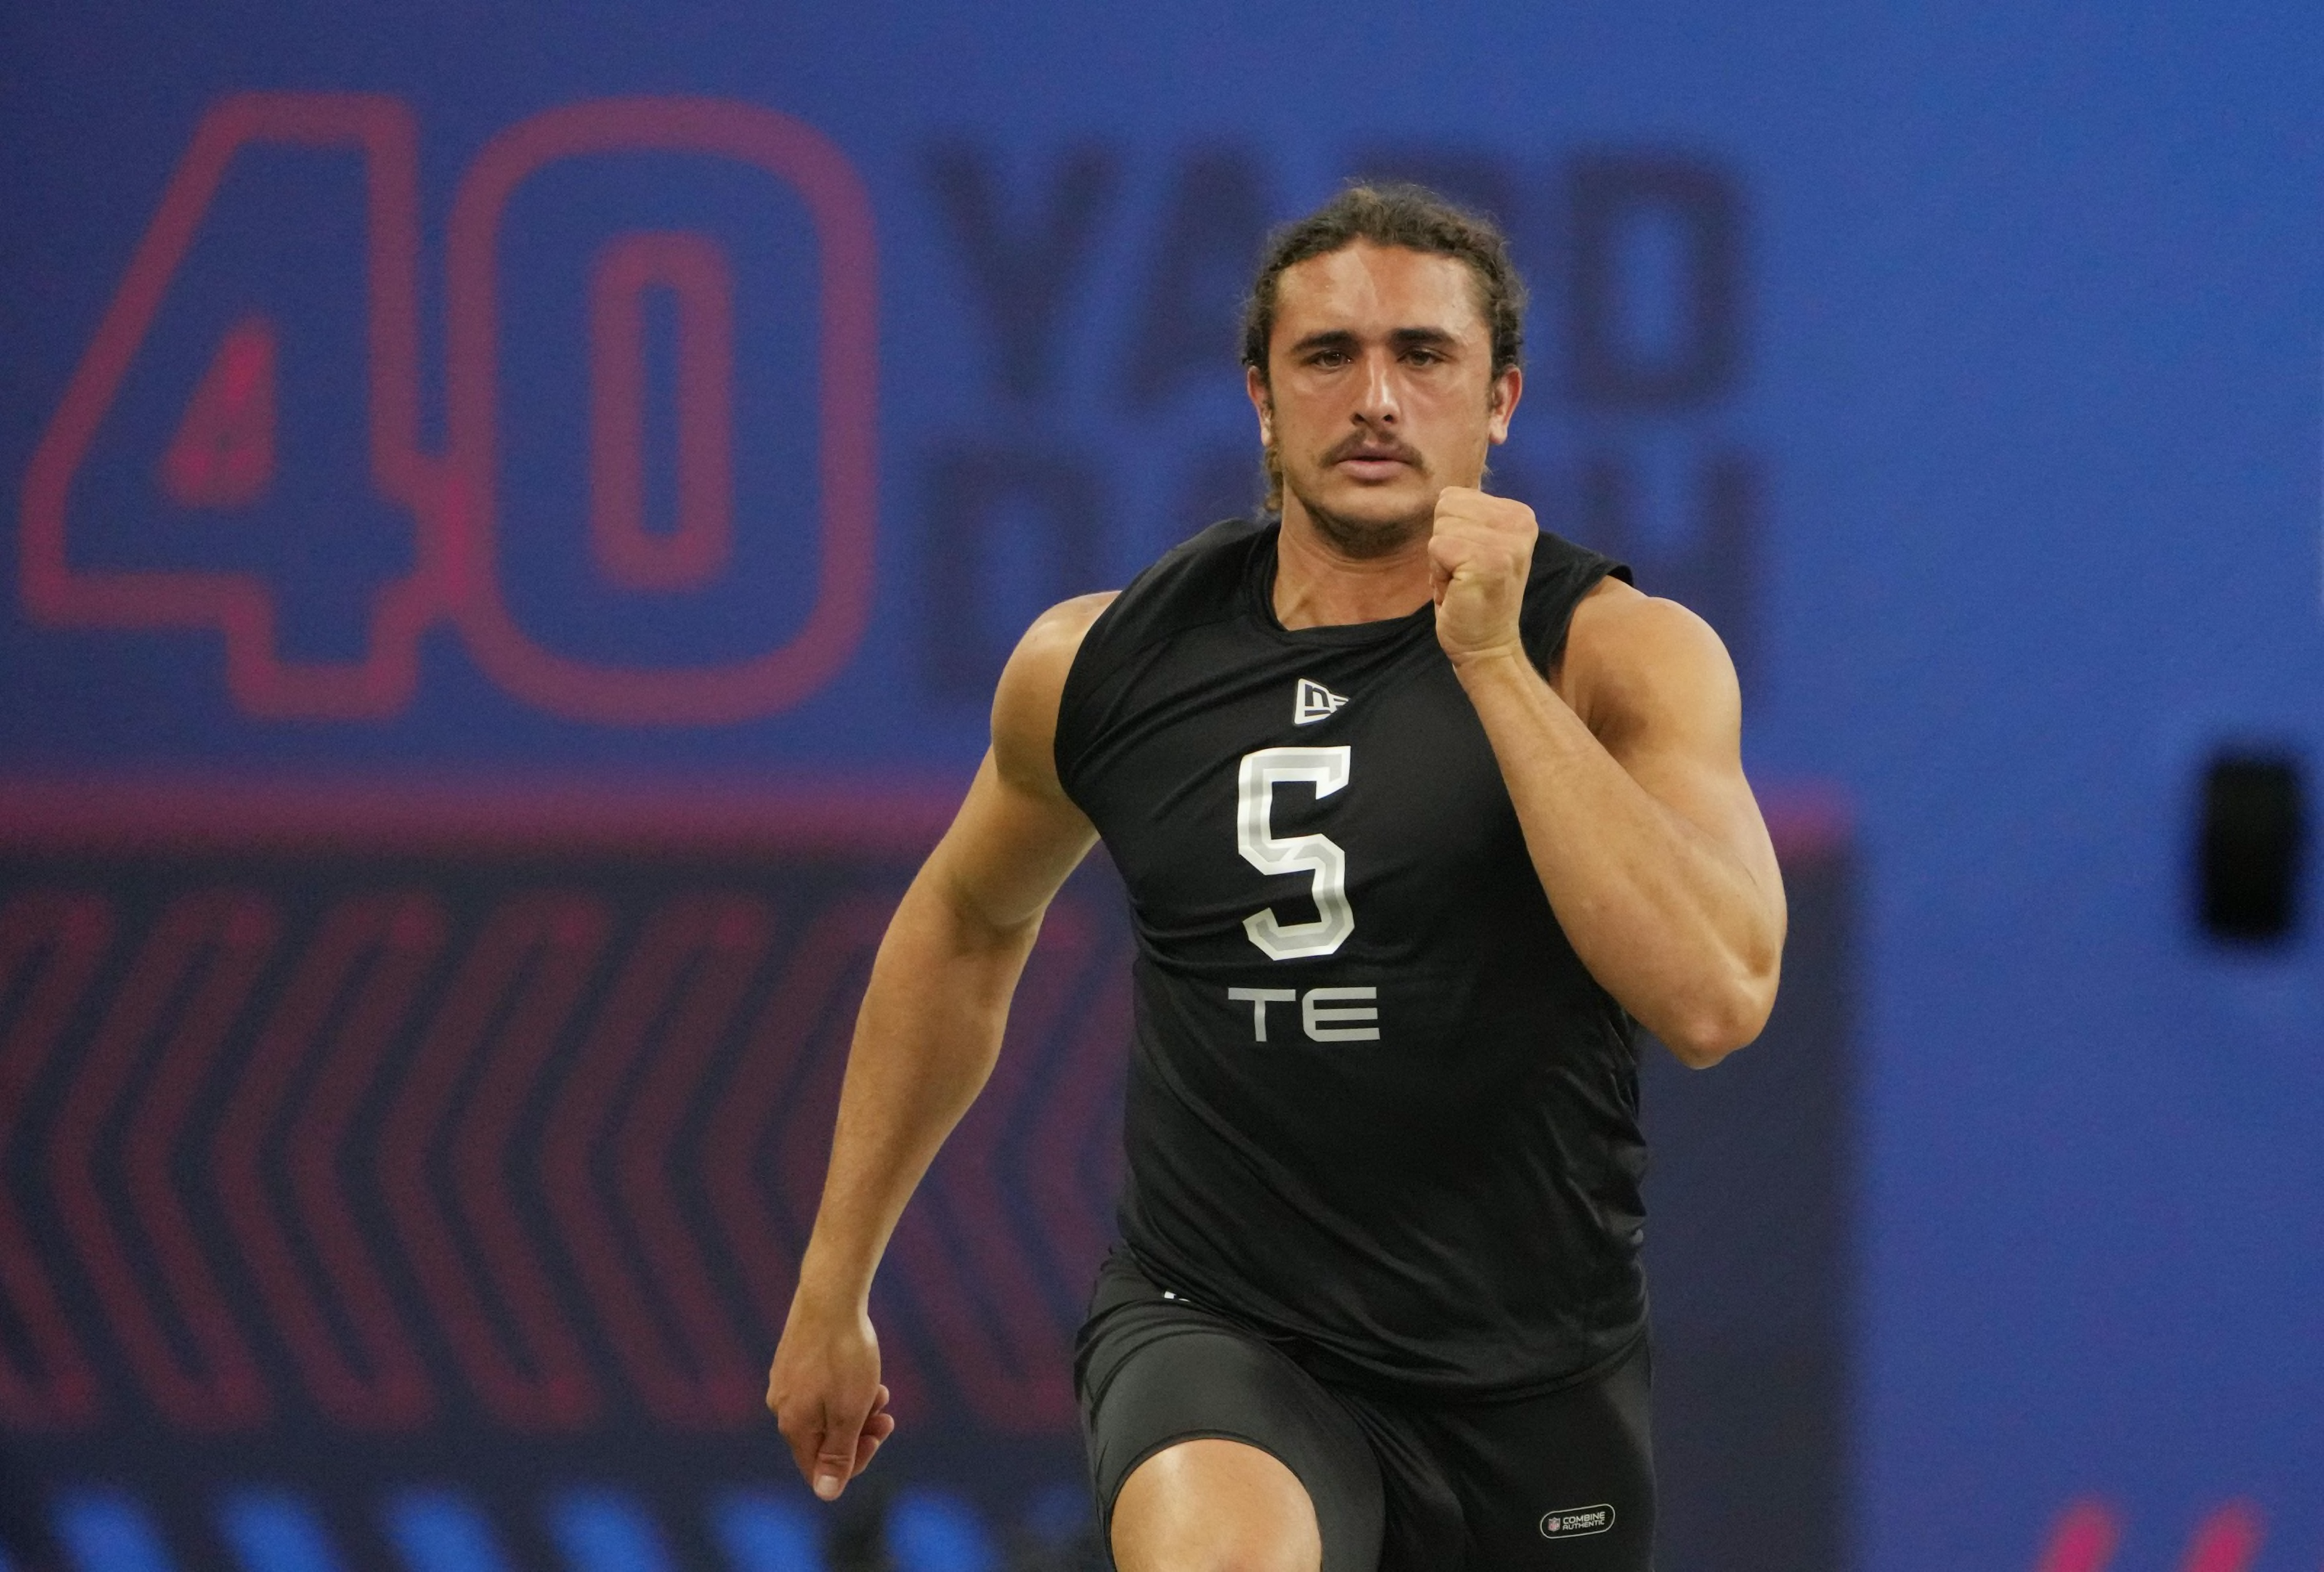 NFL Combine 2022: 3 players who improved their draft stock on Day 1 - Page 2